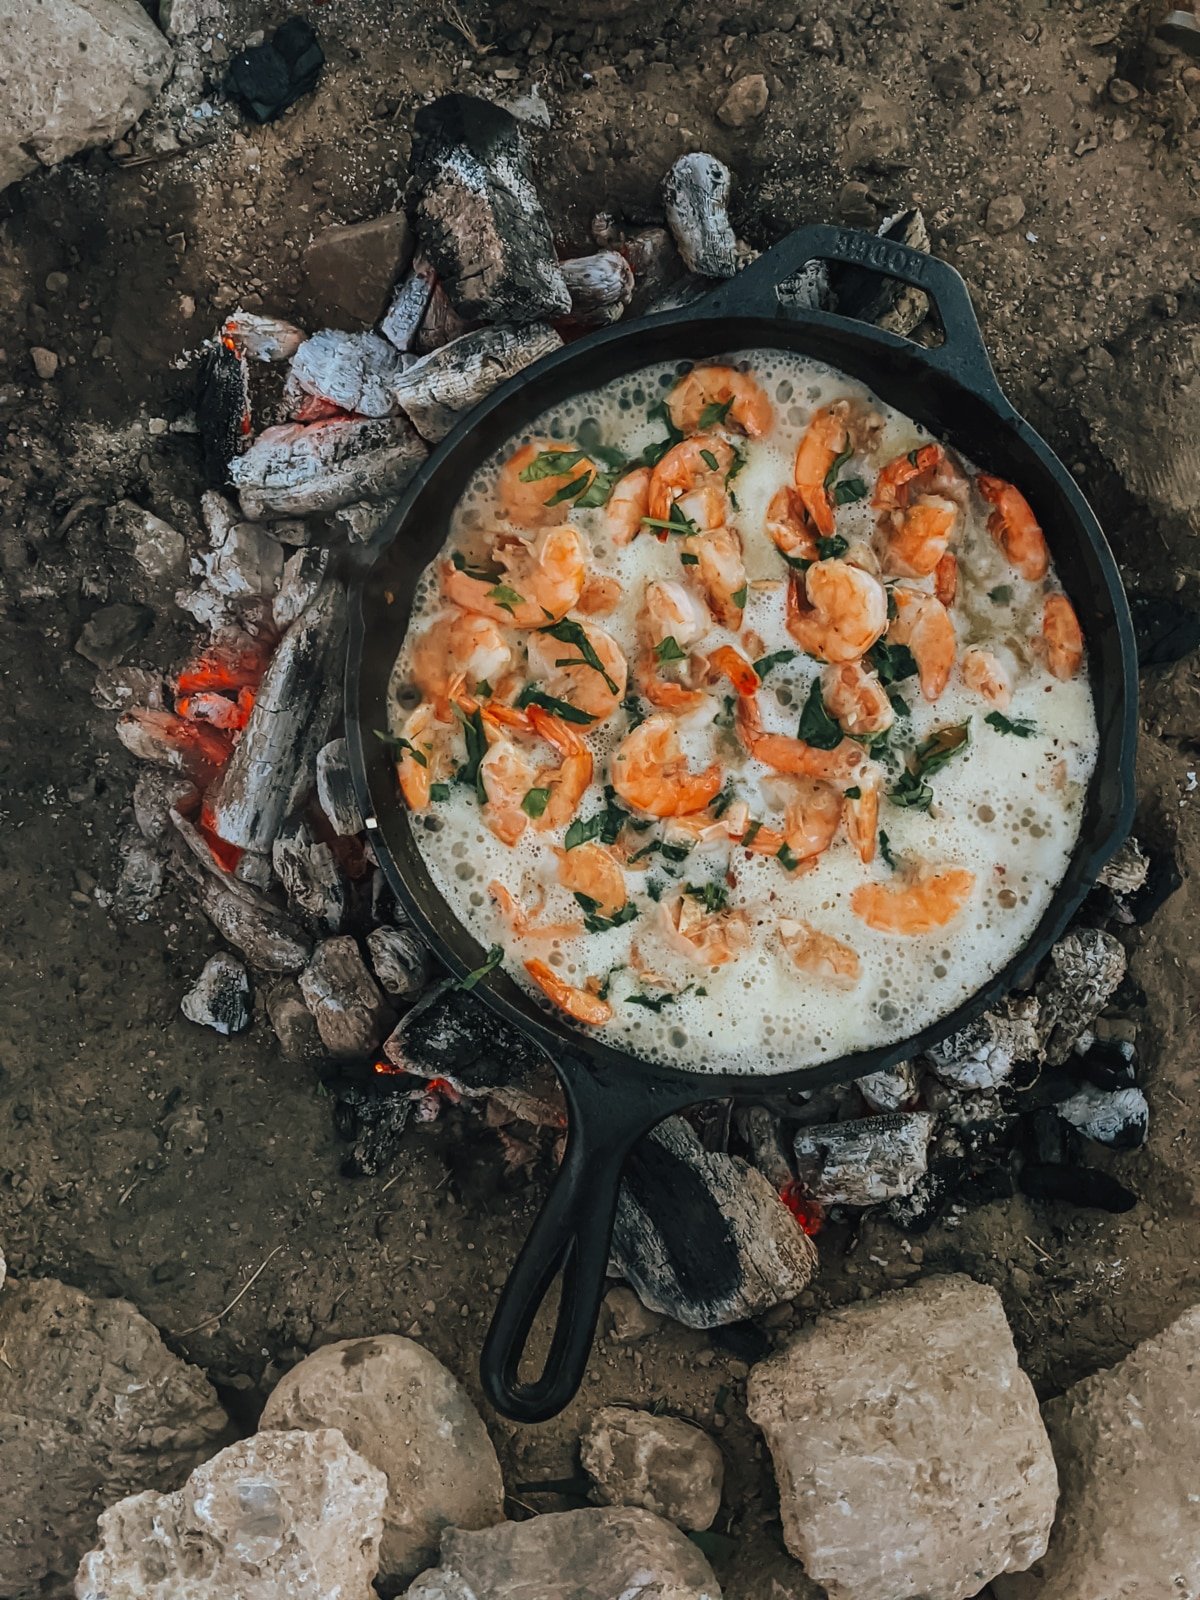 Garlic butter shrimp cooking over a campfire in a cast iron skillet